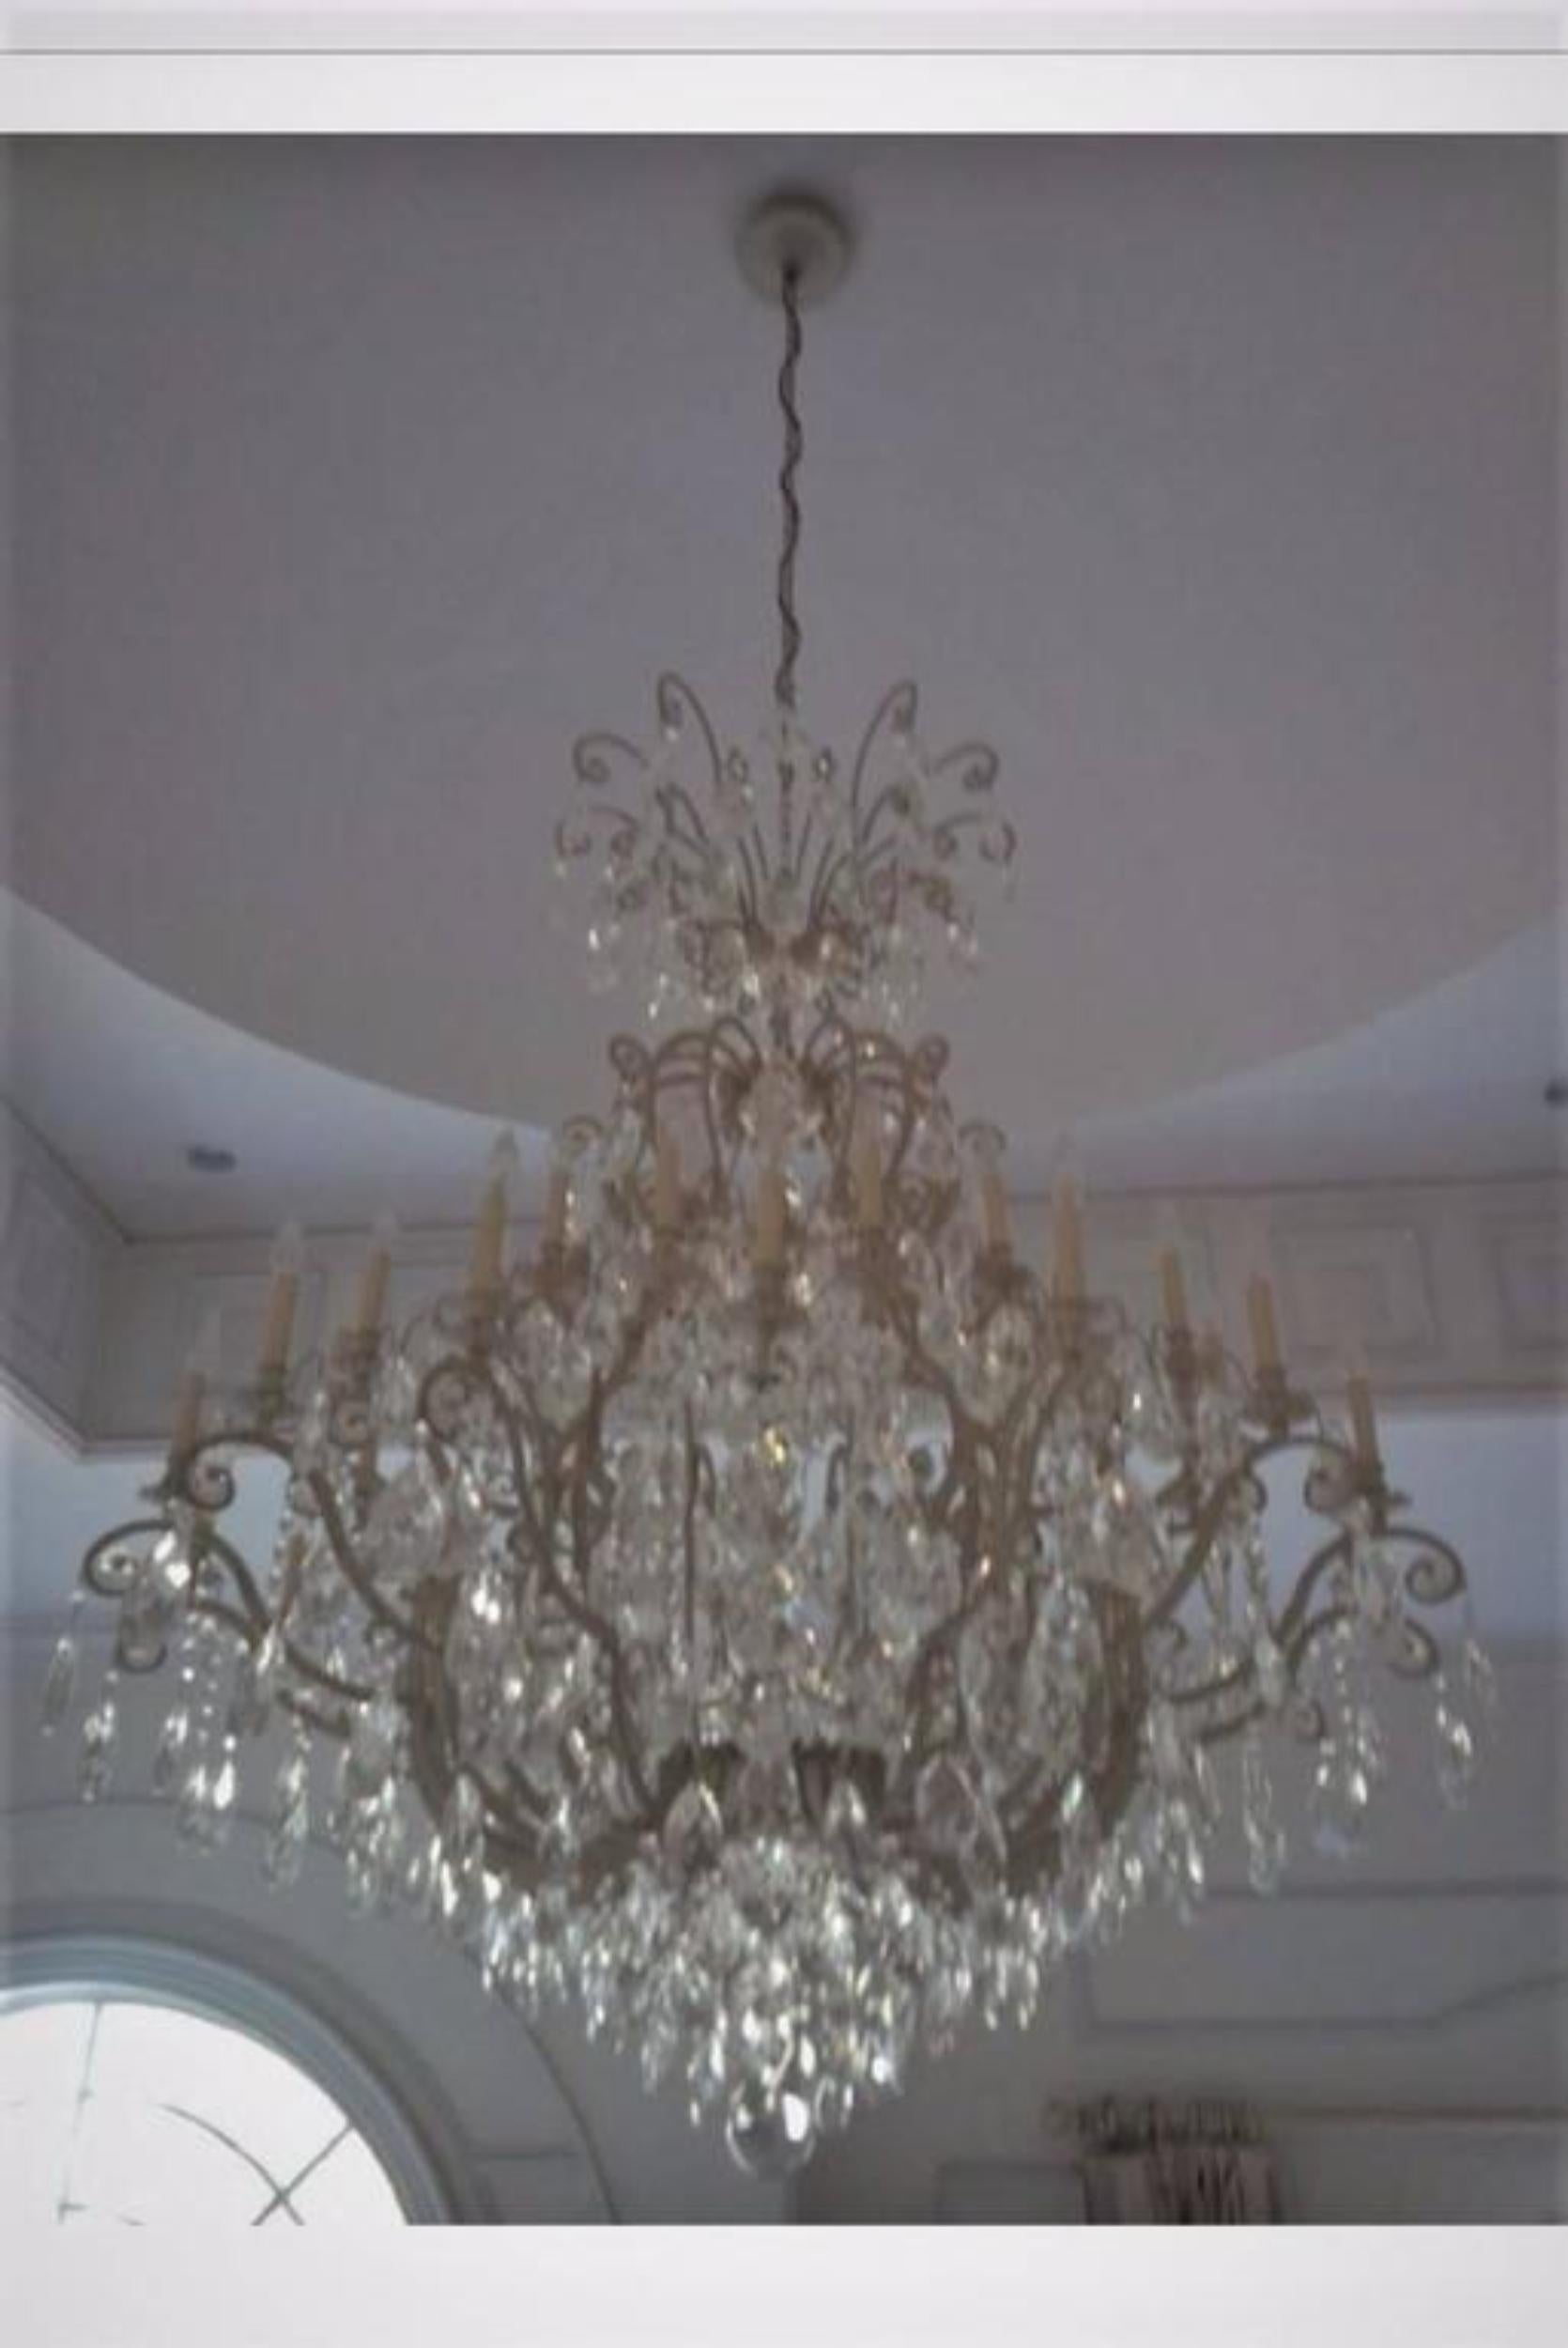 Palatial silver distressed rustic metal chandelier by Schonbek. A wonderful rustic silver metal chandelier by one of Germany's finest crystal chandelier makers. We have recently been commissioned to sell this fantastic group of lighting from a